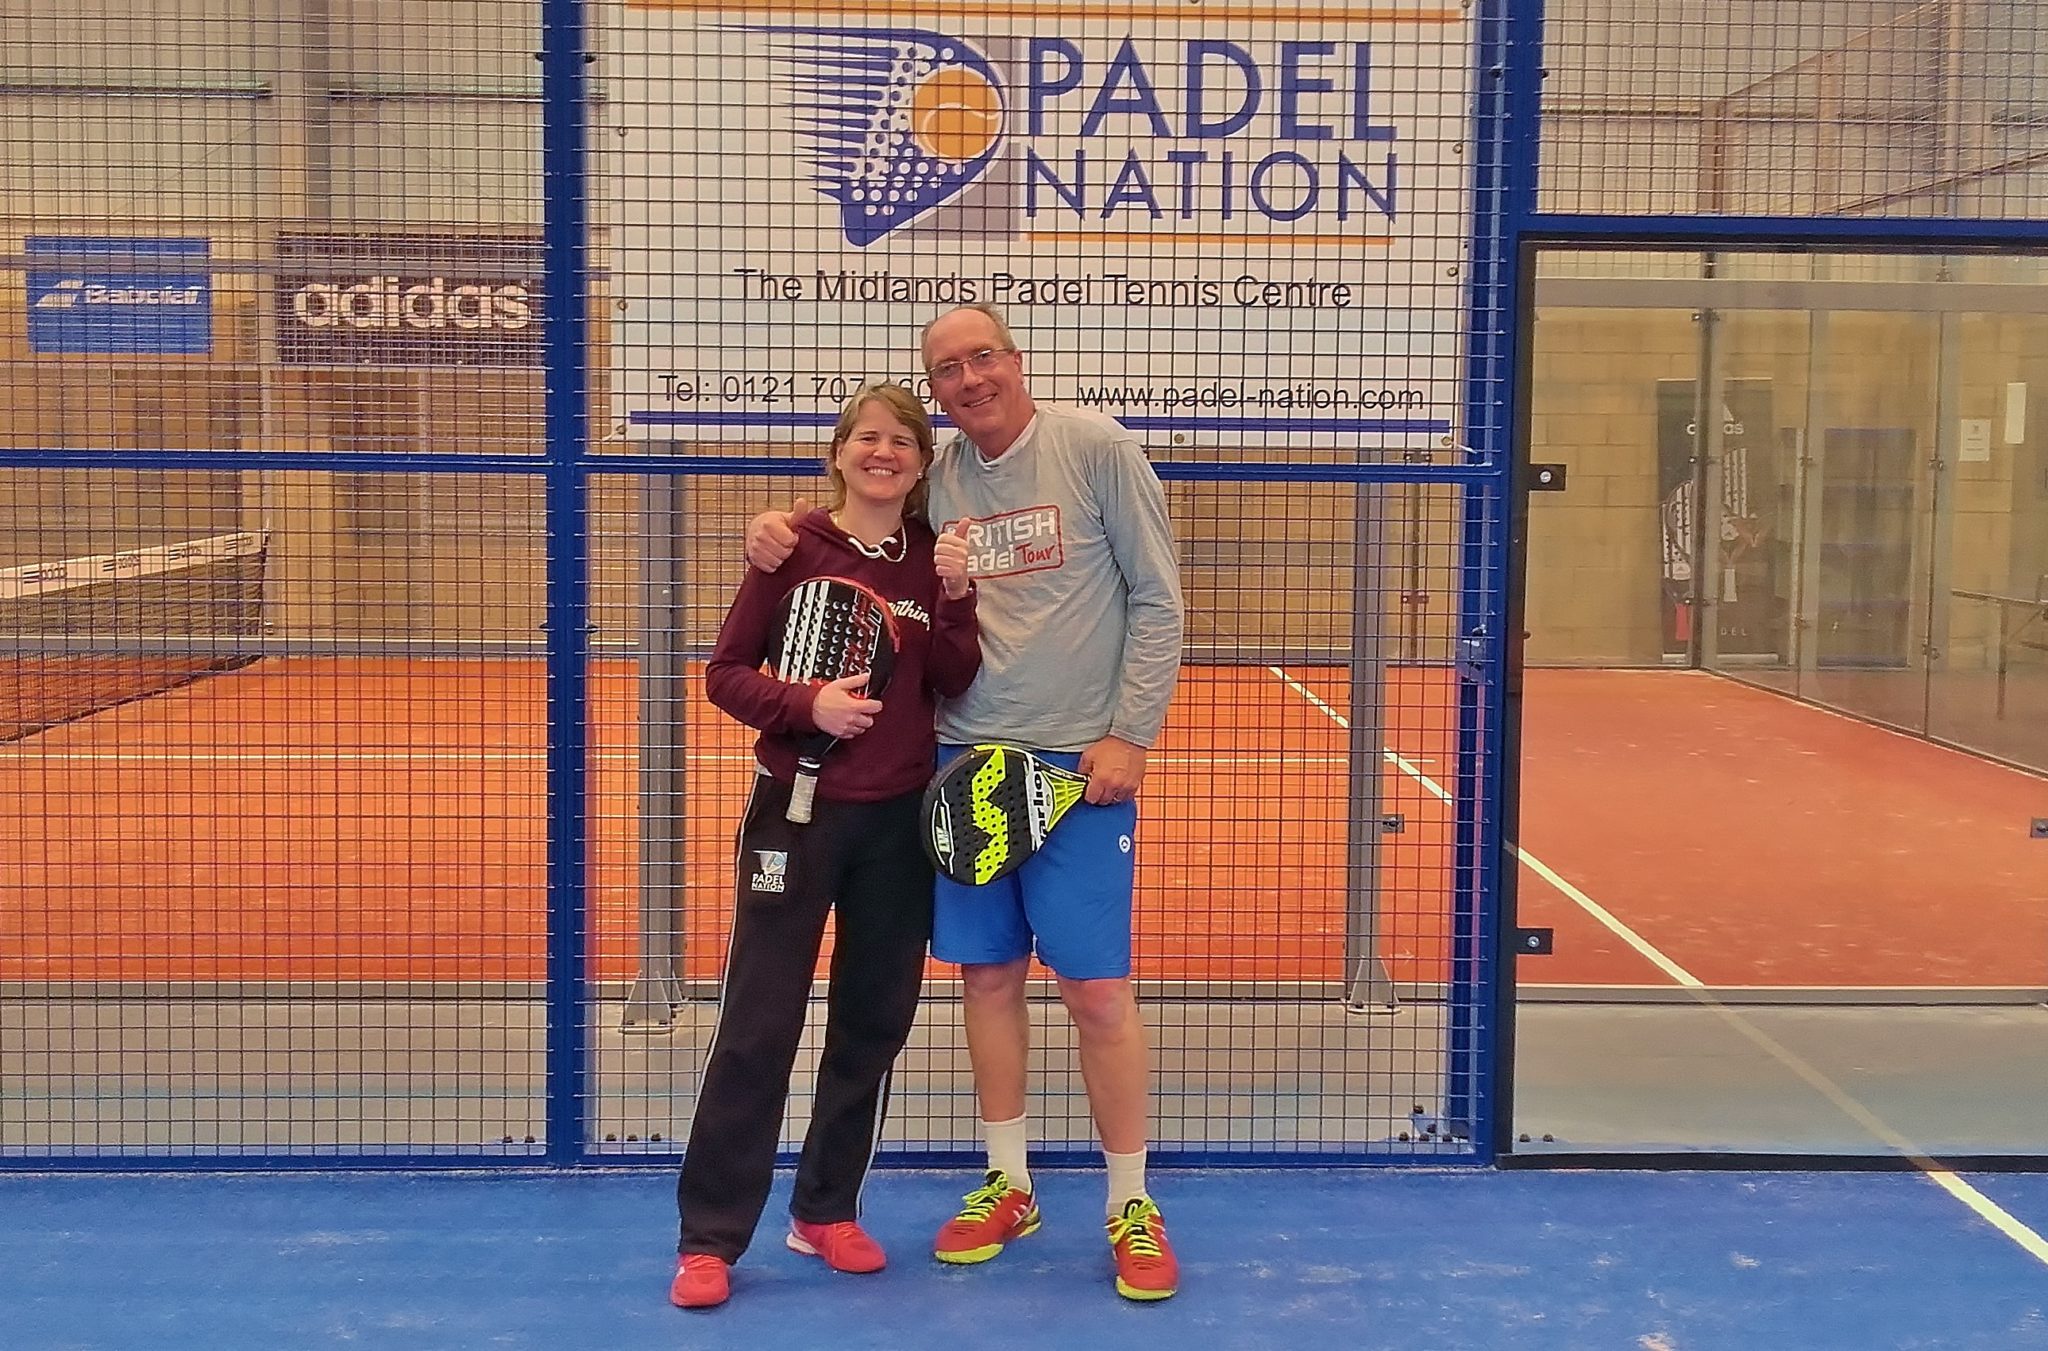 Inventory of the padel English with Peter Vann